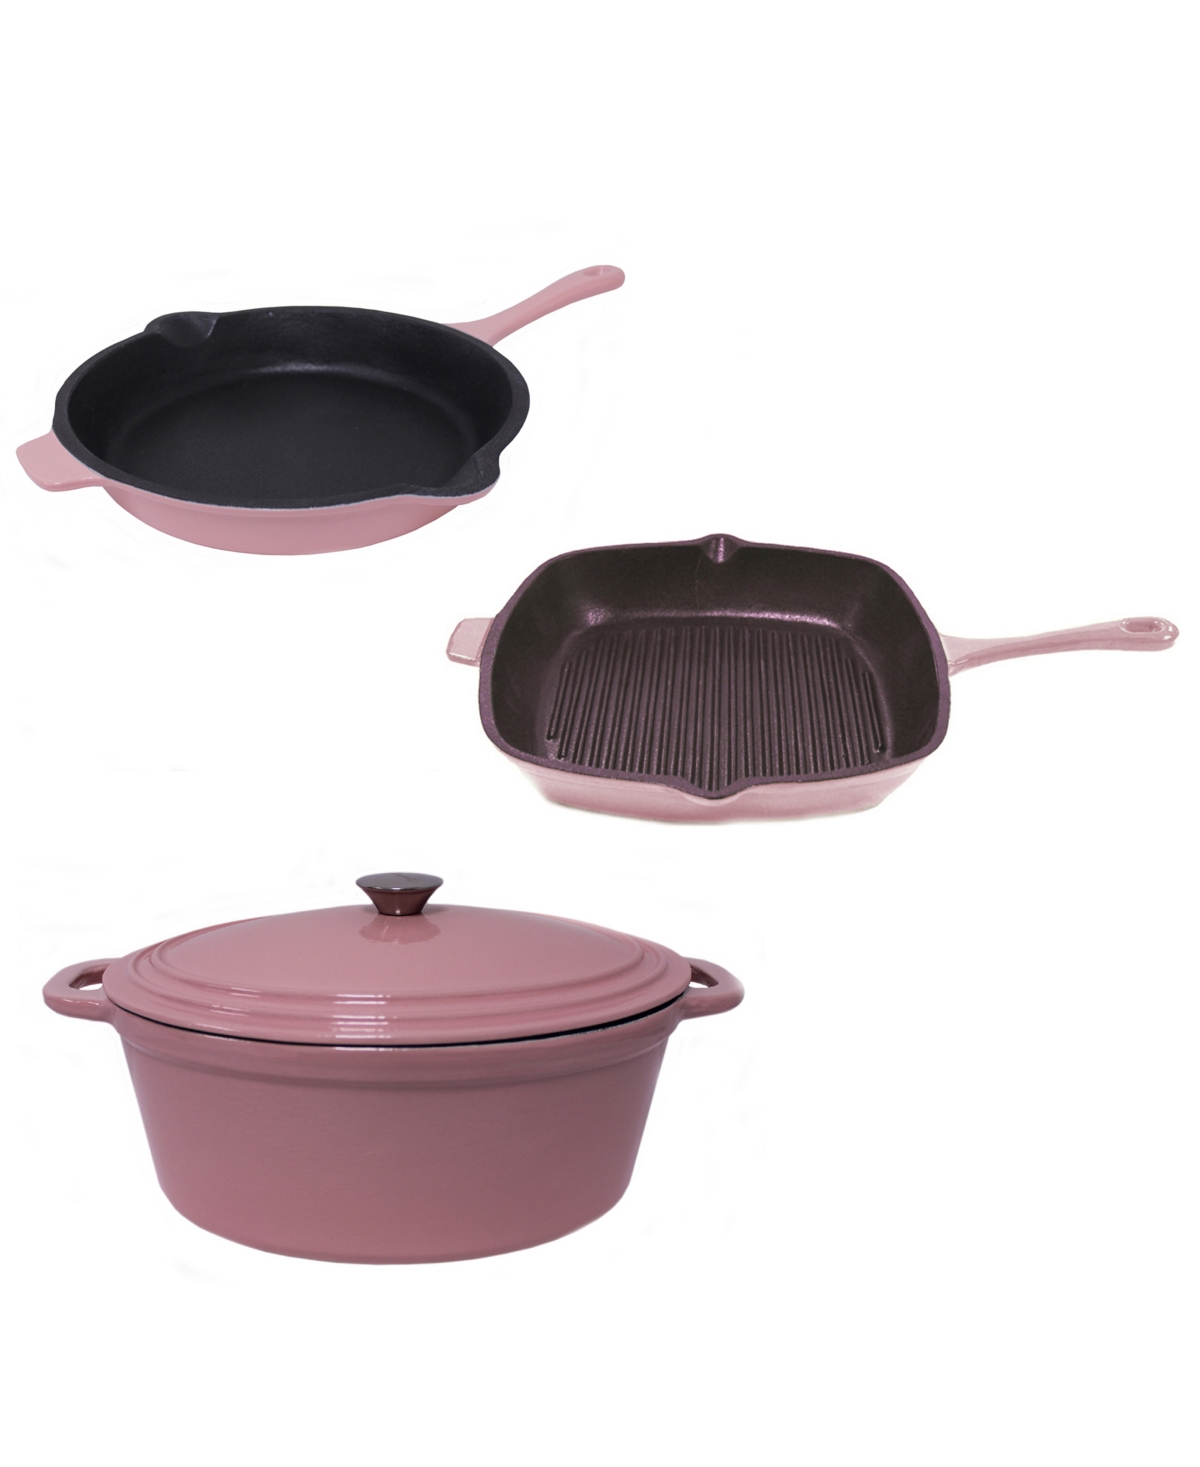 Neo Cast Iron Fry Pan, Grill Pan and 5 Quart Covered Dutch Oven, Set of 3